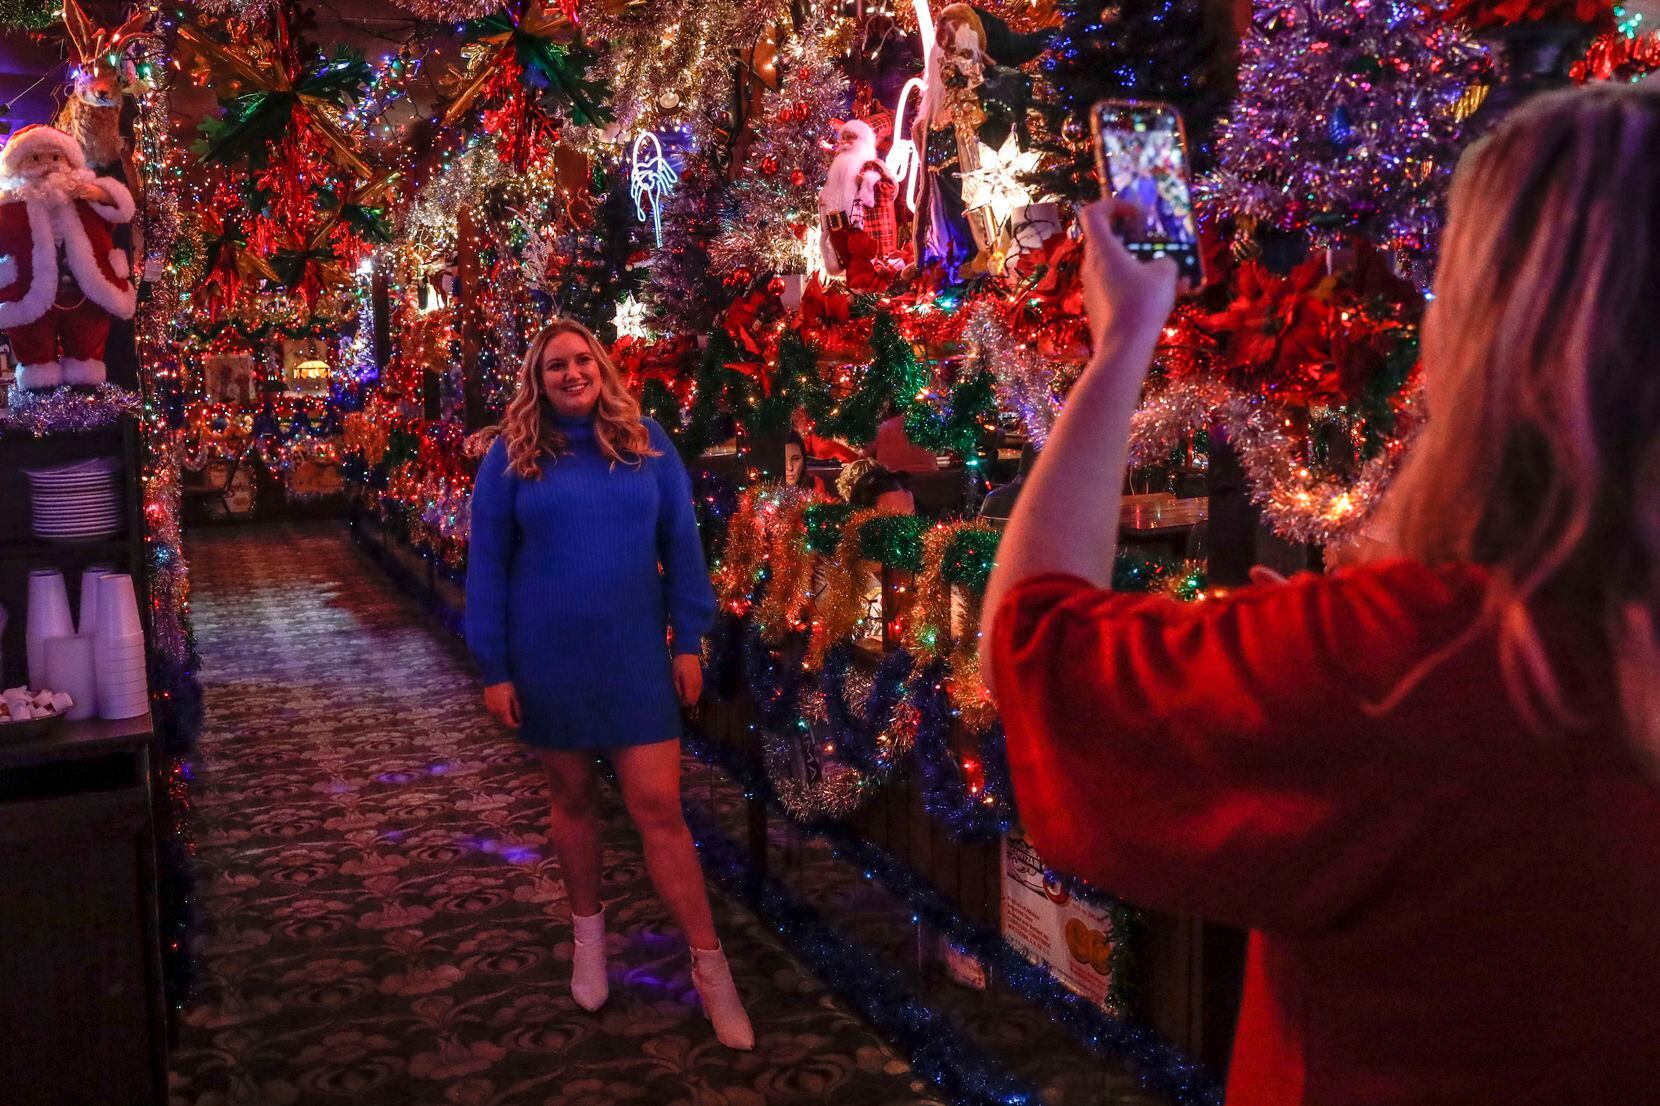 Elizabeth Brown gets her photo taken by her sister, Nicole Brown, among the Christmas...